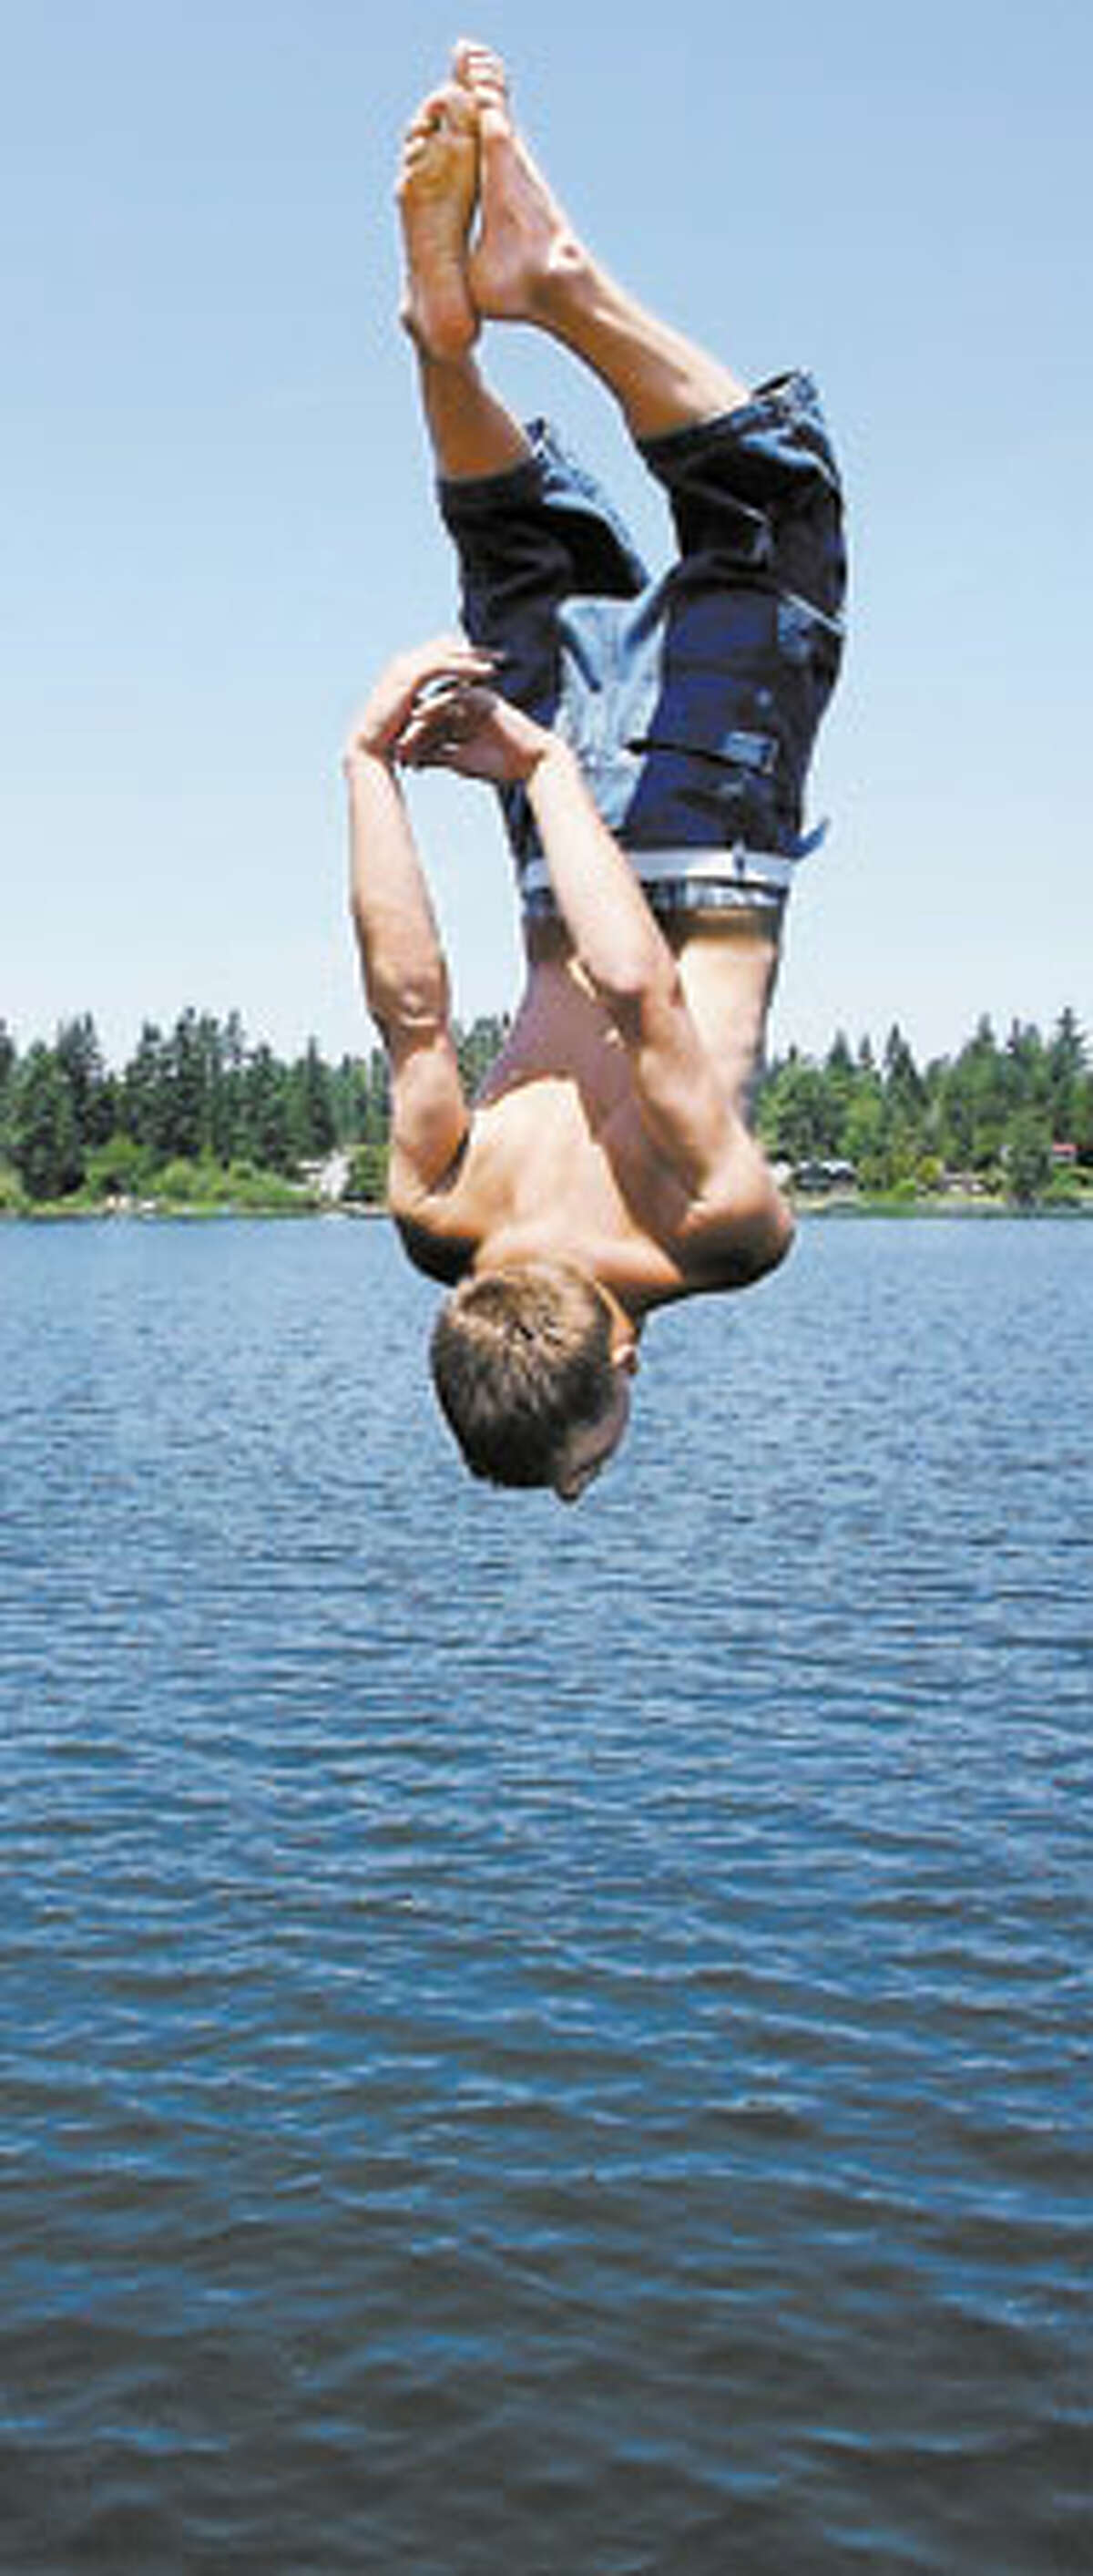 Cliff Swanson, 17, of Marysville does a back flip off the railing of the dock at Martha Lake Park in Mill Creek.